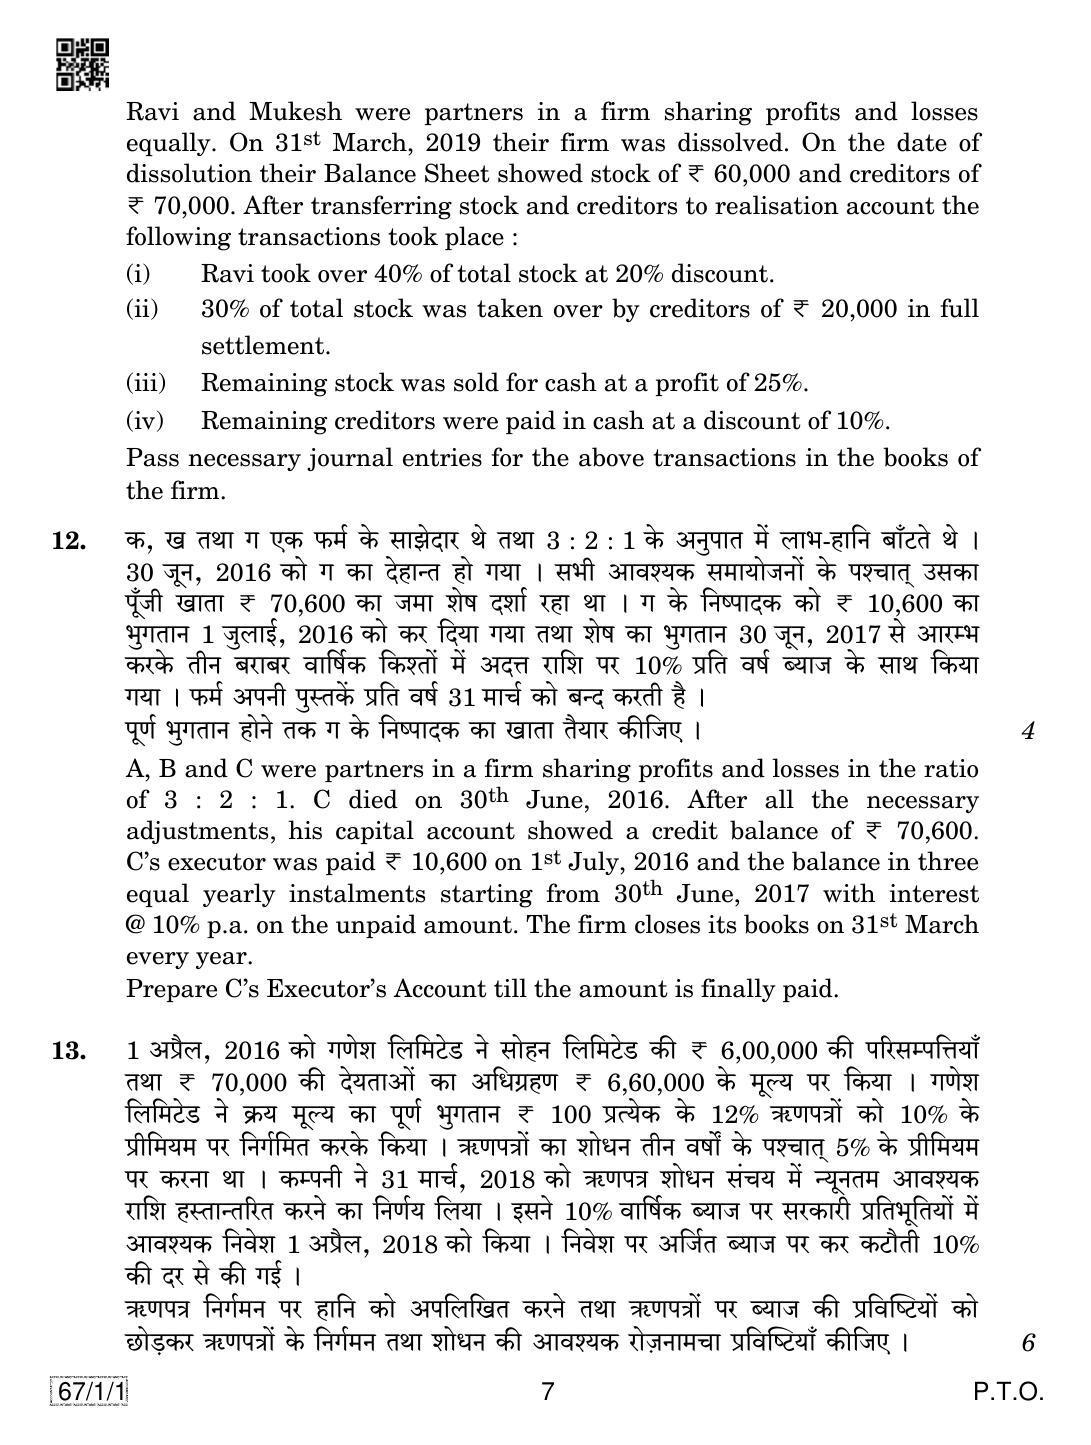 CBSE Class 12 67-1-1 ACCOUNTANCY 2019 Compartment Question Paper - Page 7